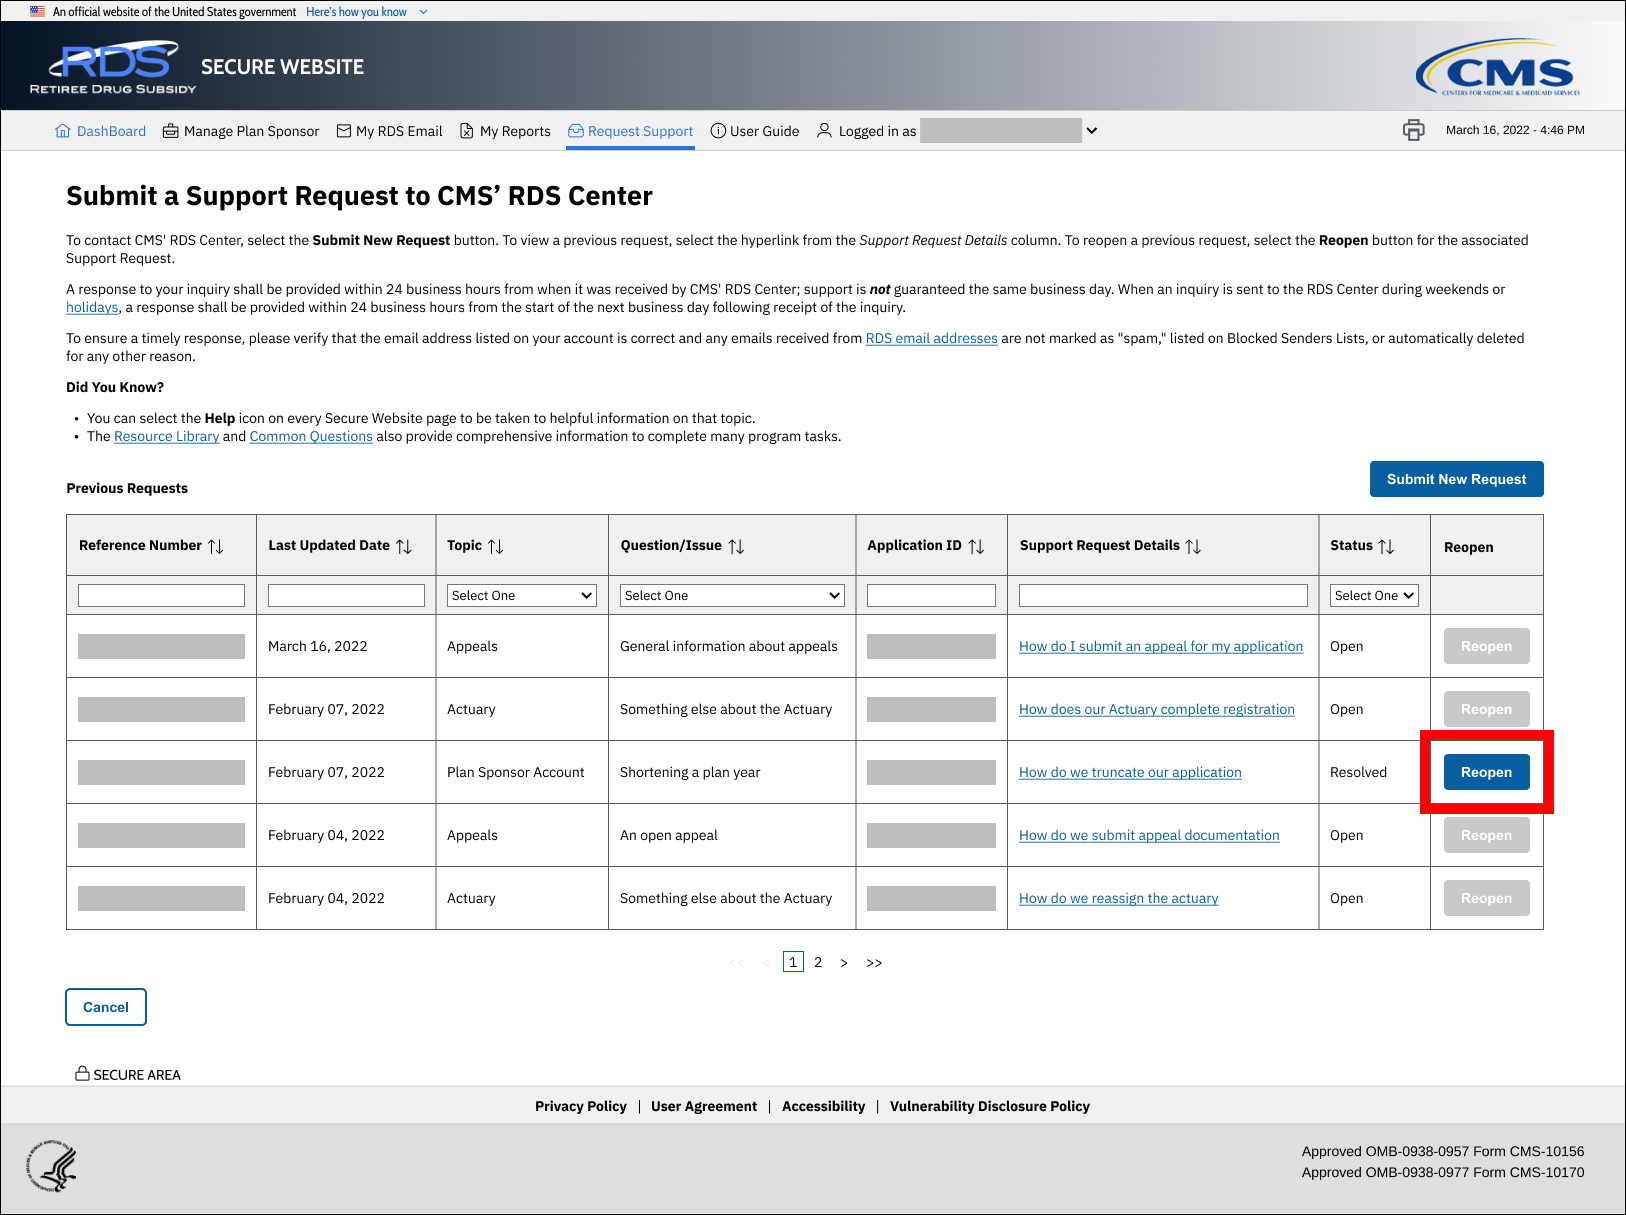 Submit a Support Request to CMS' RDS Center page with sample data. Reopen button is highlighted.